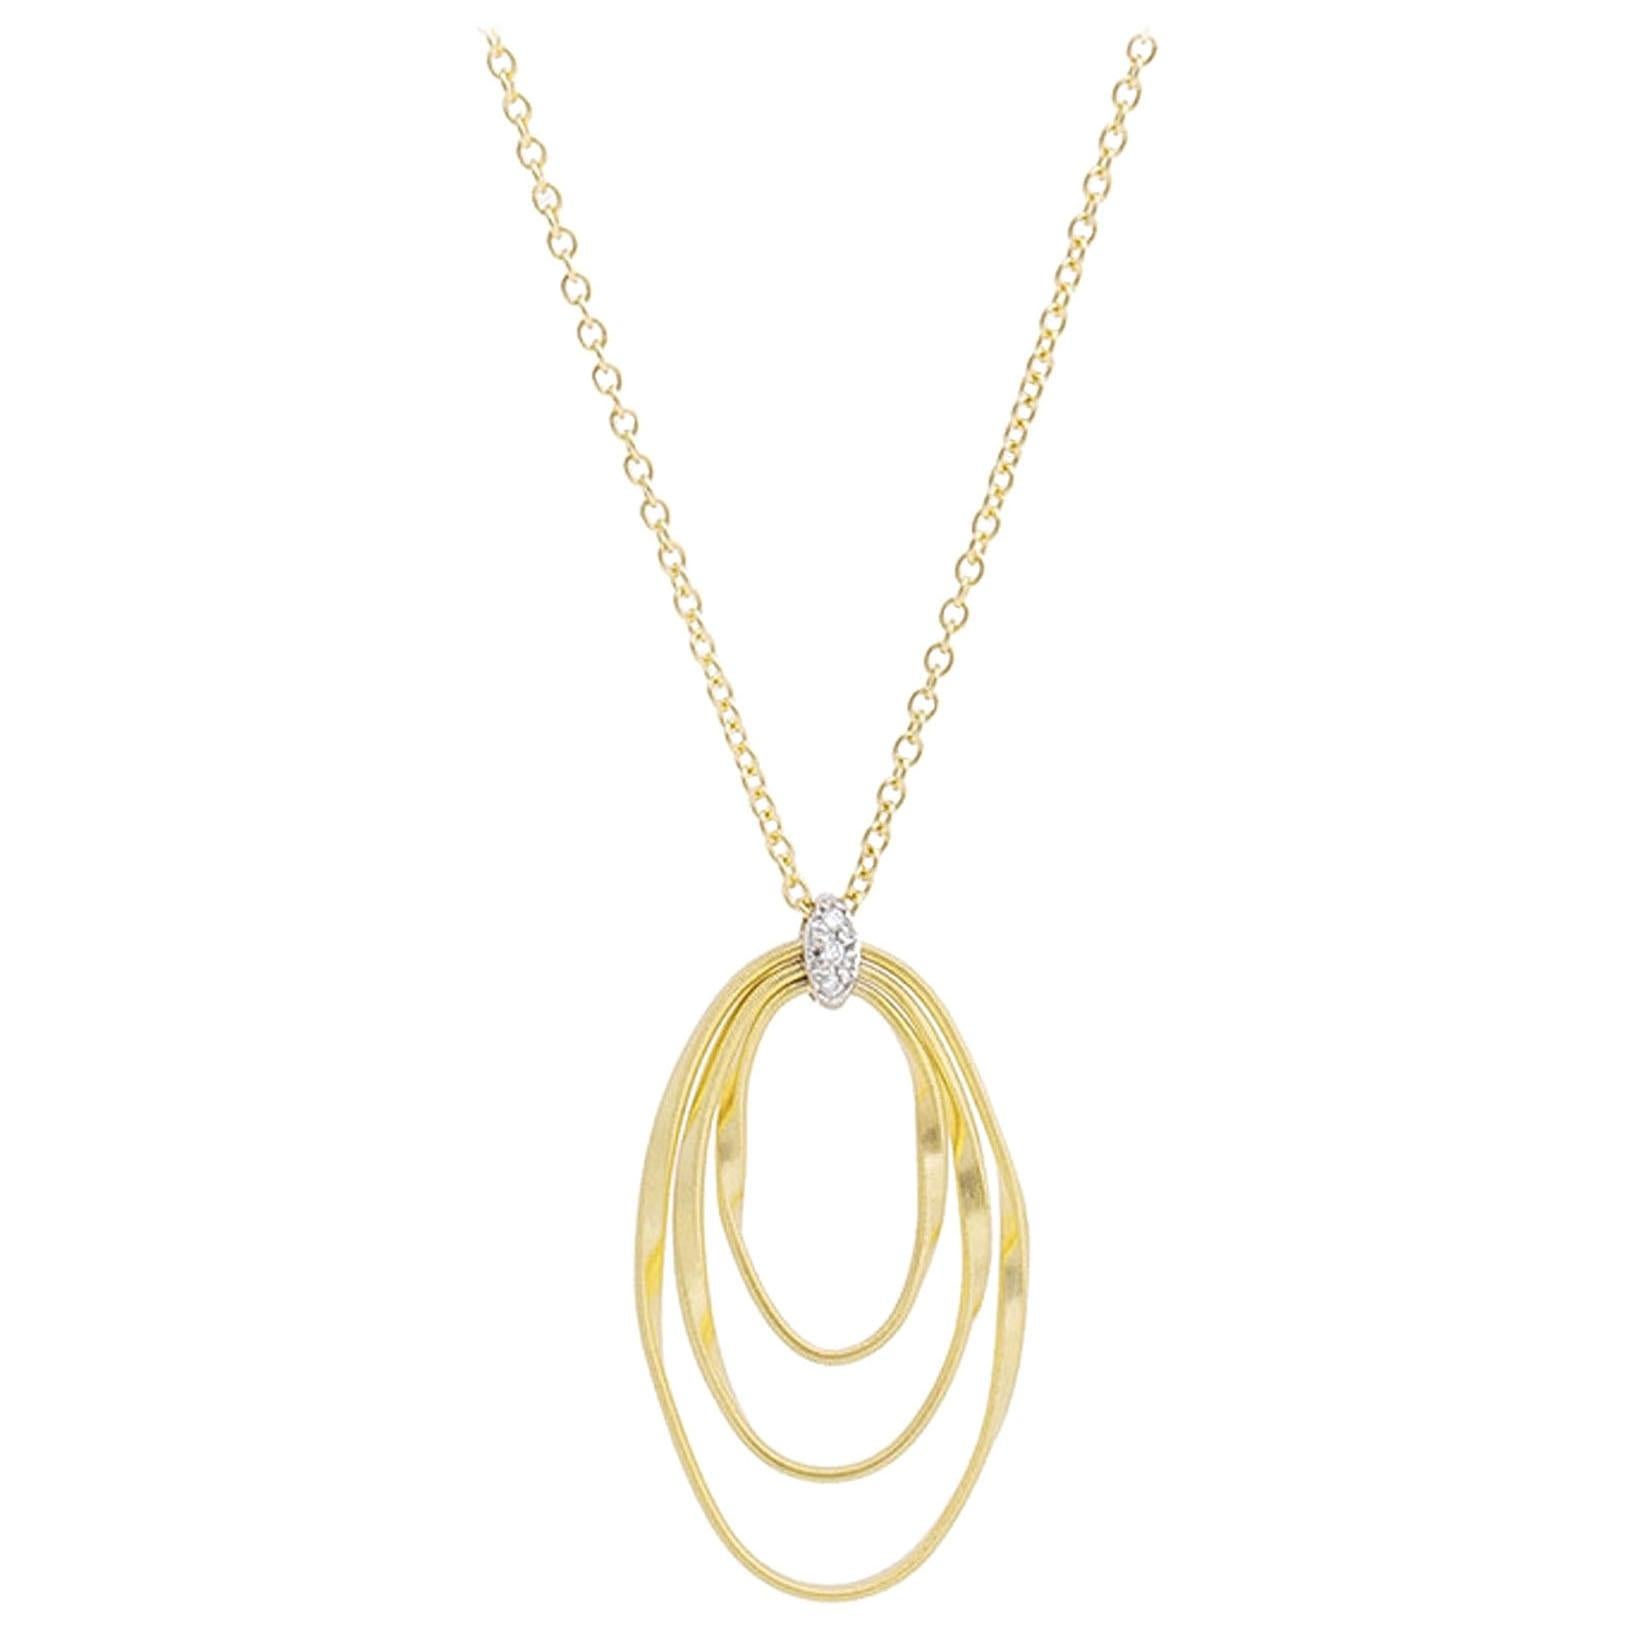 Marco Bicego Marrakech Onde Yellow Gold & Diamond Ladies Necklace CG785B YW M5 For Sale